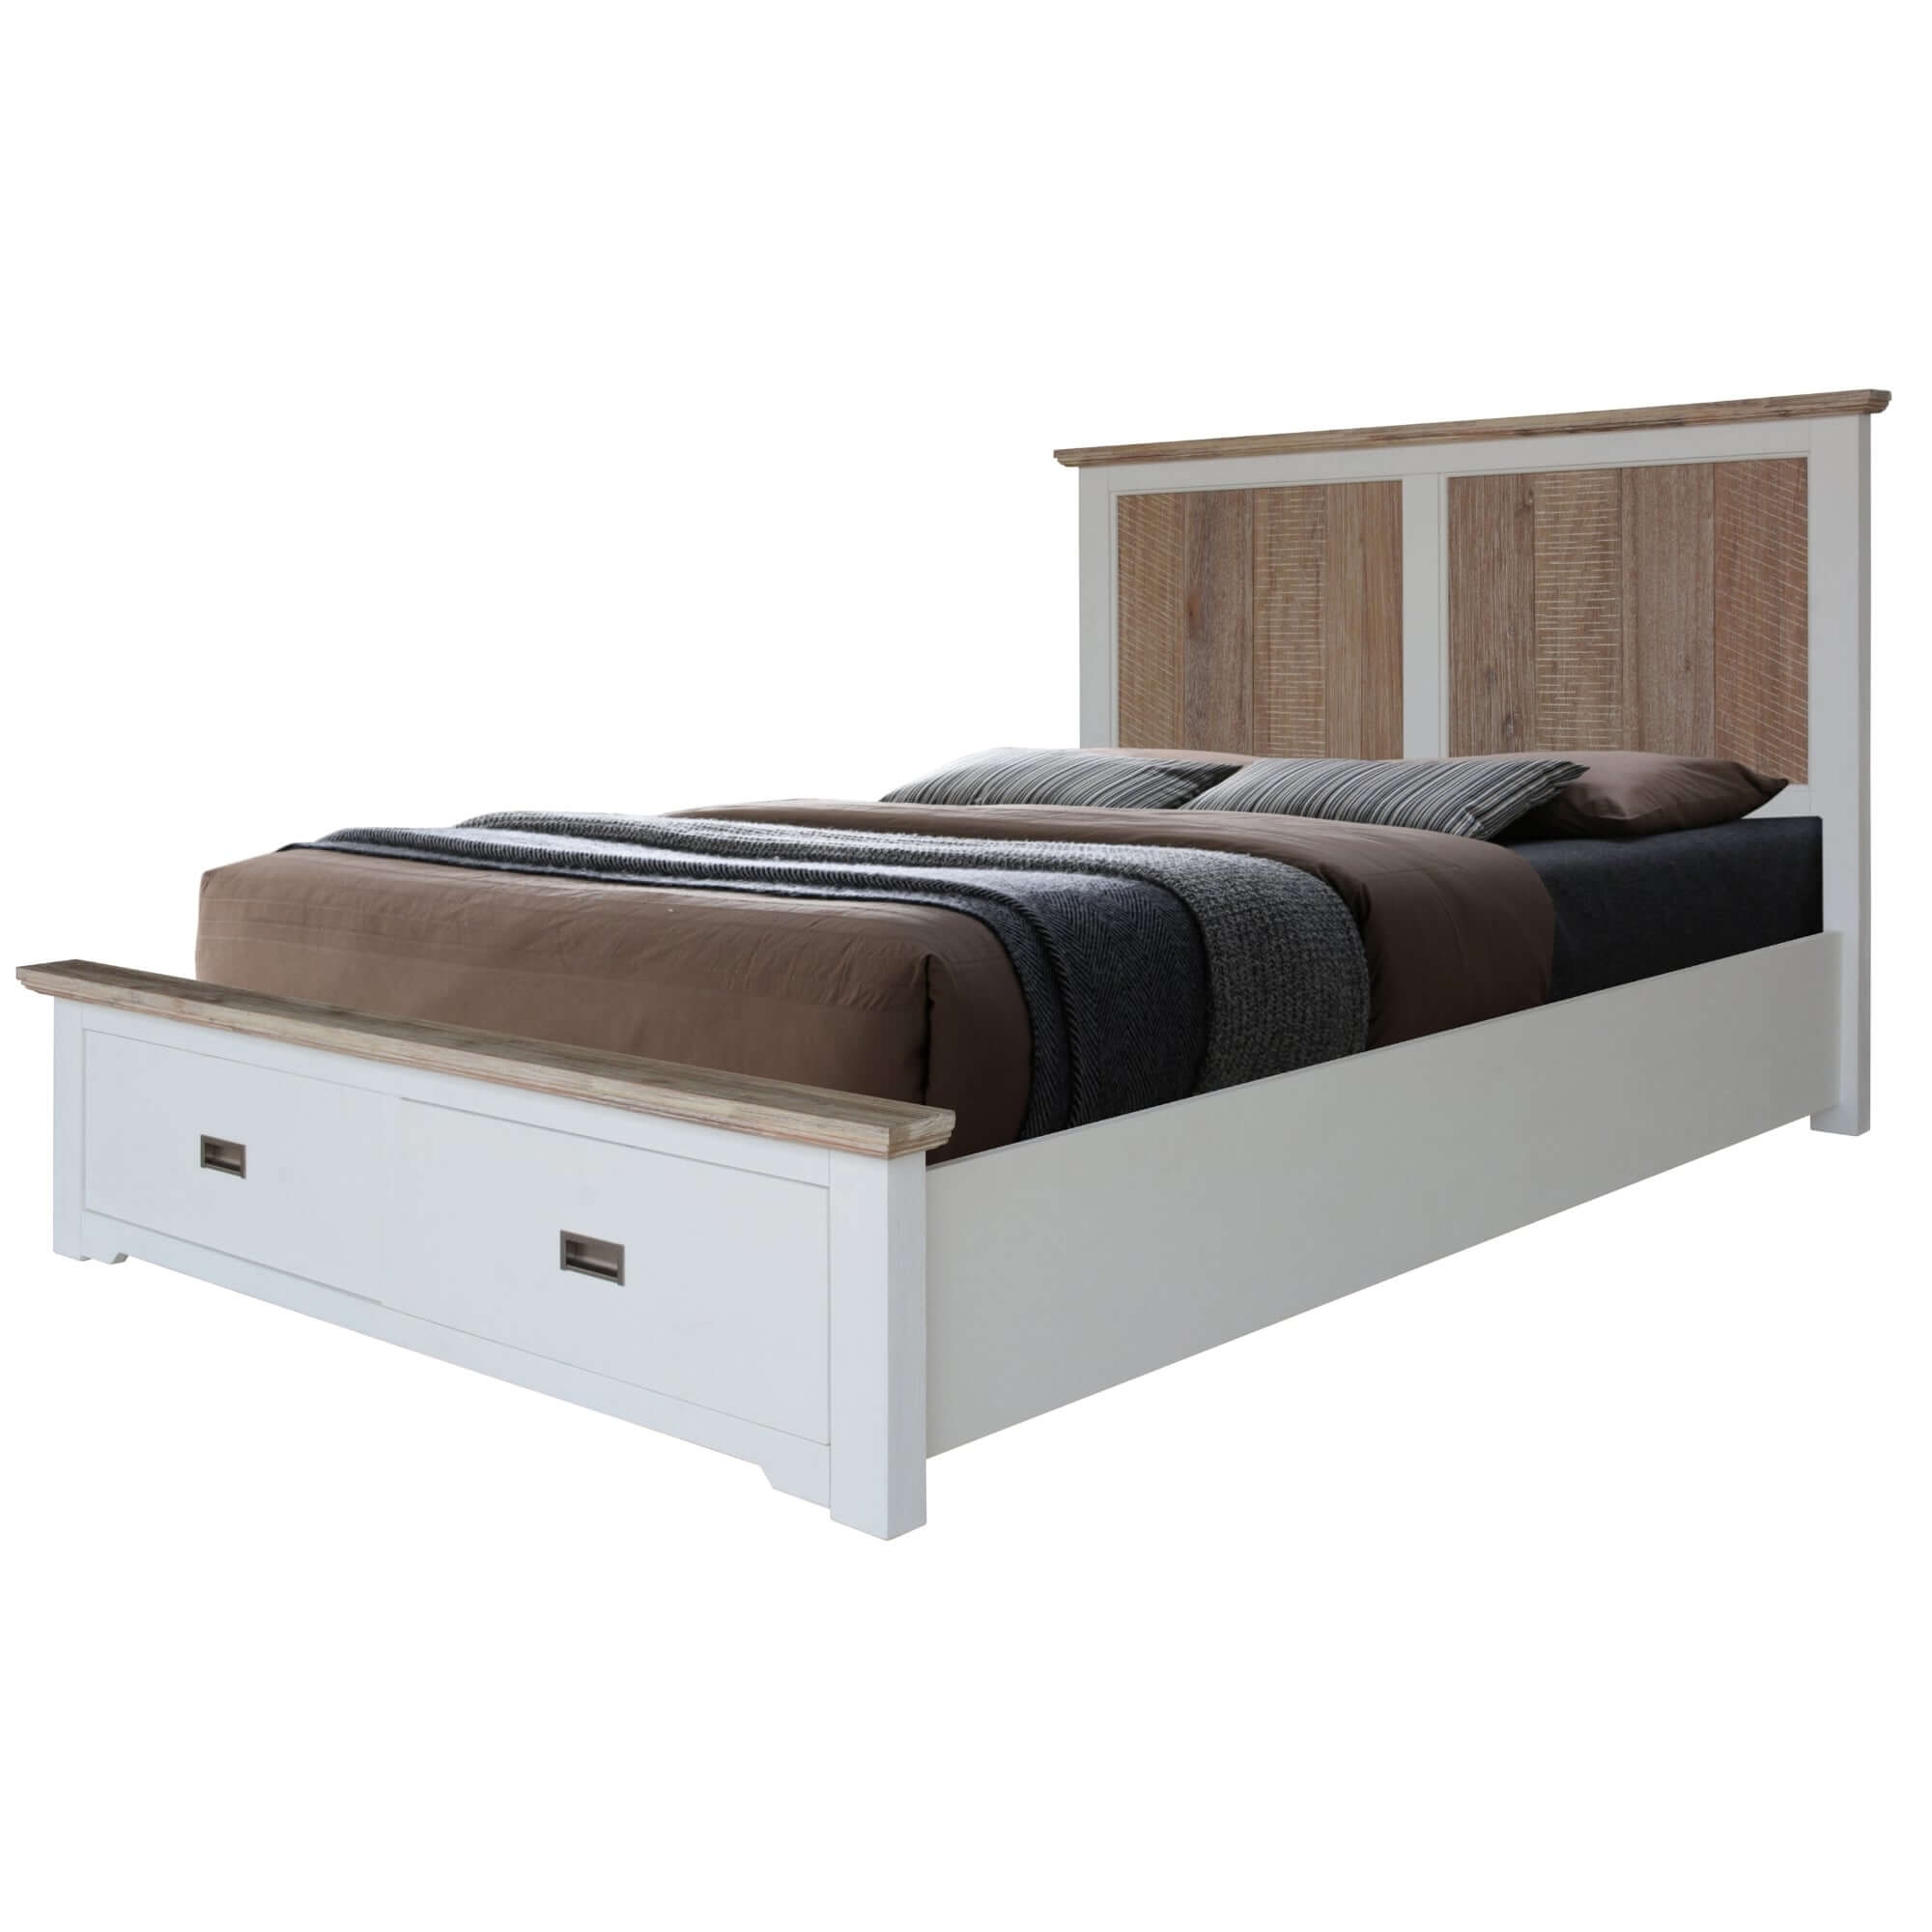 Fiona Queen Bed Frame with Storage - Timber Base-Upinteriors